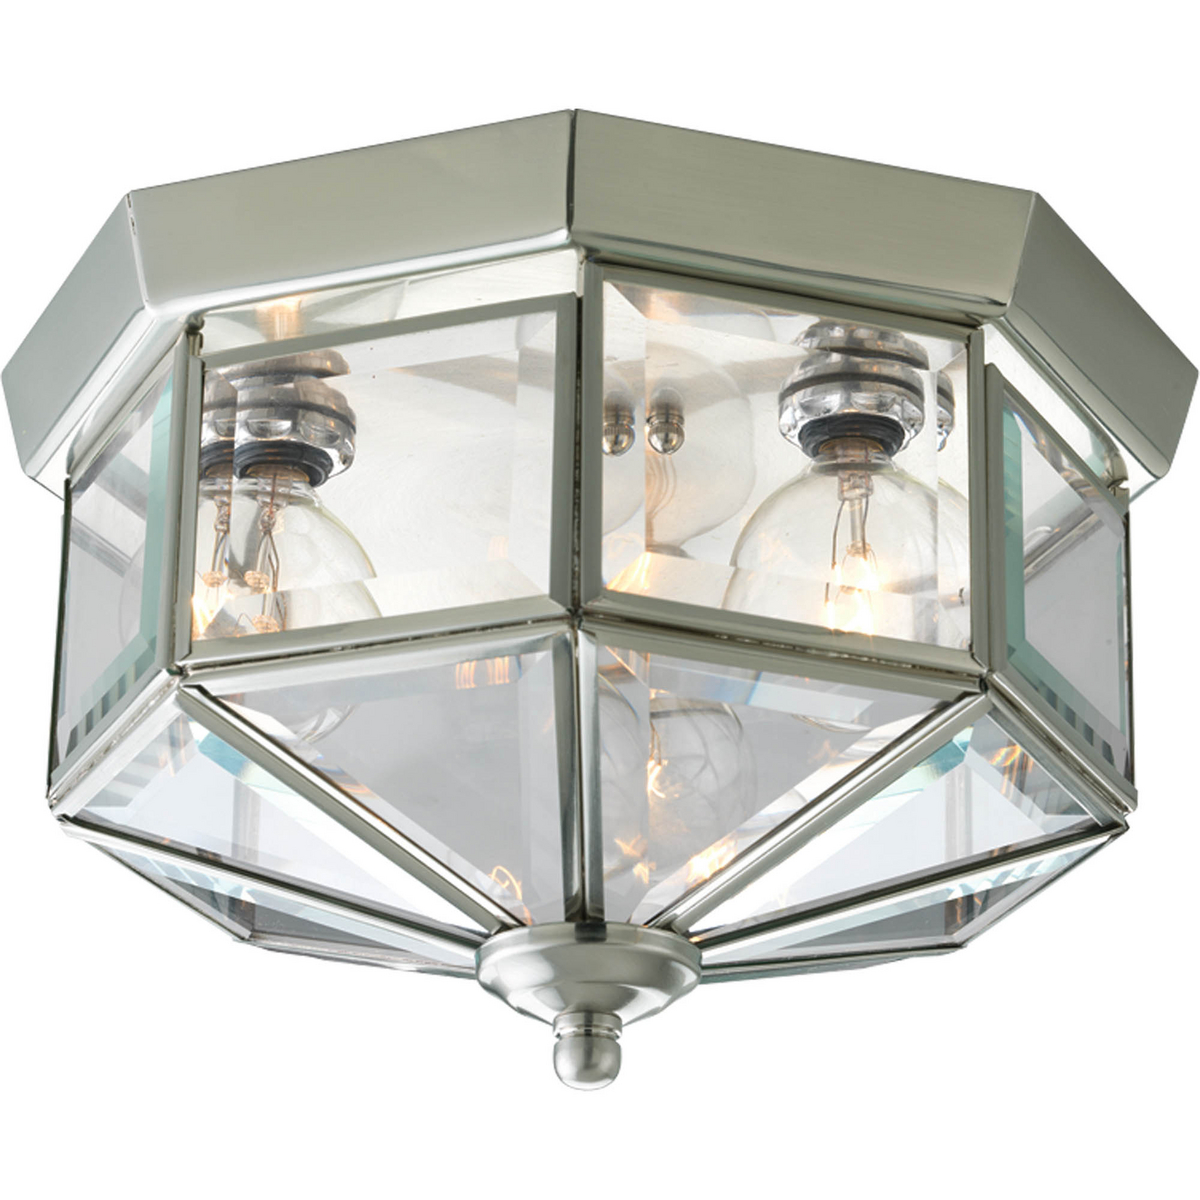 Three-light octagonal close-to-ceiling fixture with clear, bound beveled glass. Solid brass construction. G-lamps recommended. Traditional styling perfect for halls, closets, porches, laundry rooms, bedroom. Brushed Nickel finish.